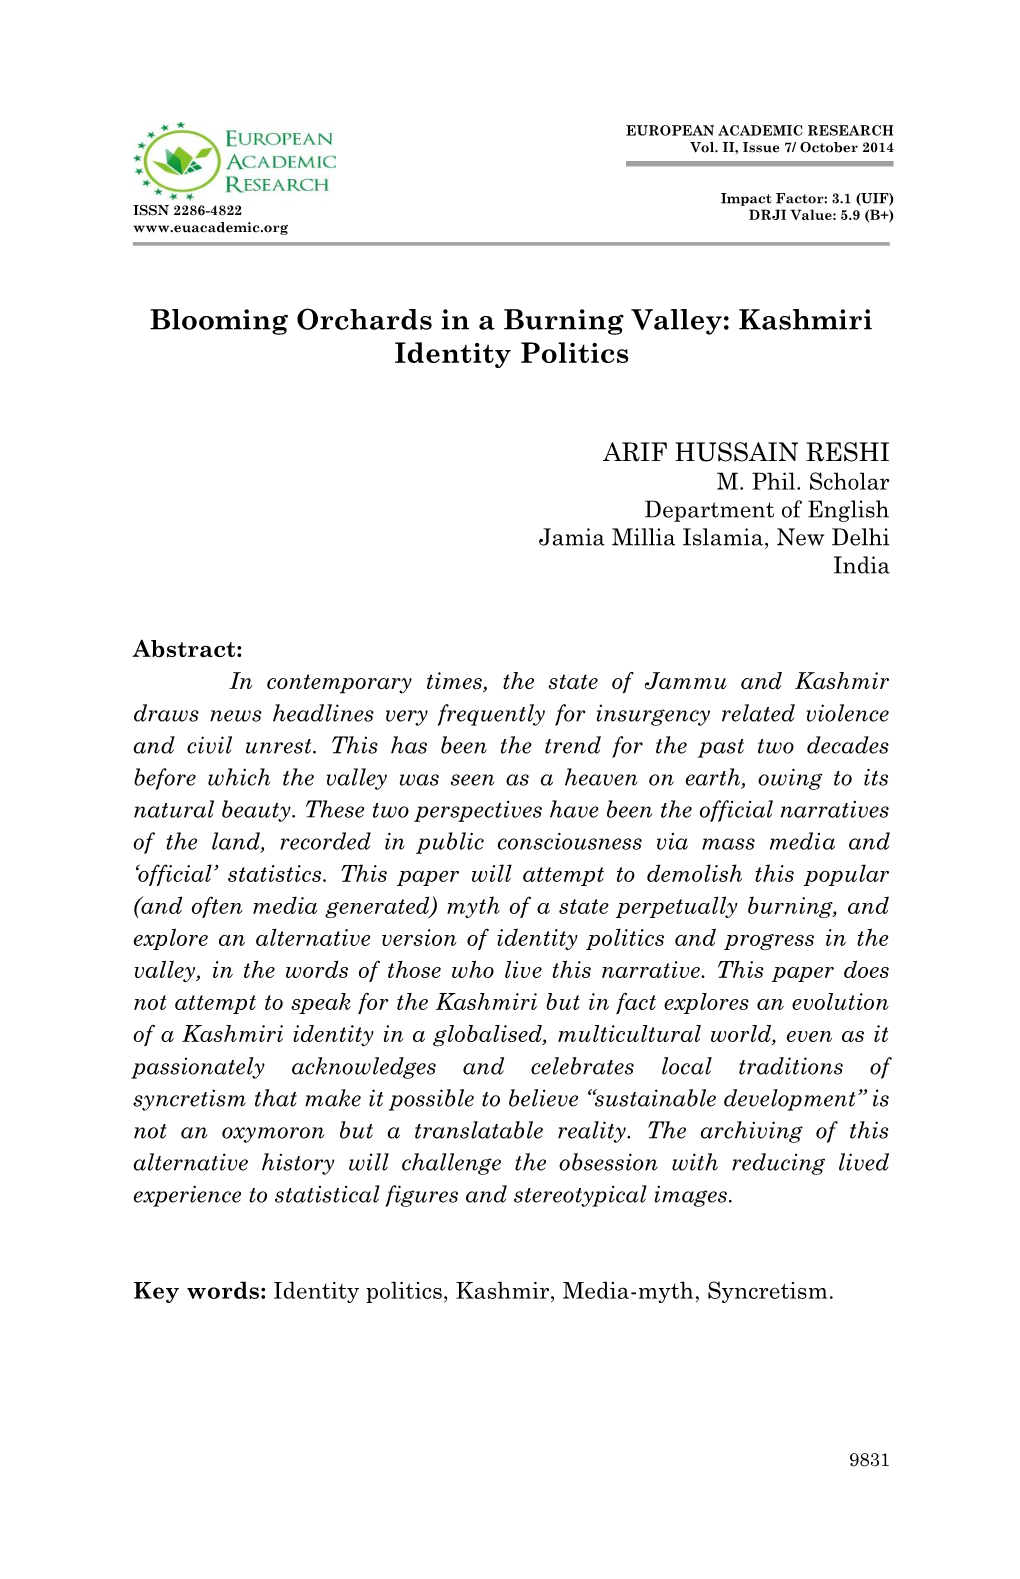 Blooming Orchards in a Burning Valley: Kashmiri Identity Politics